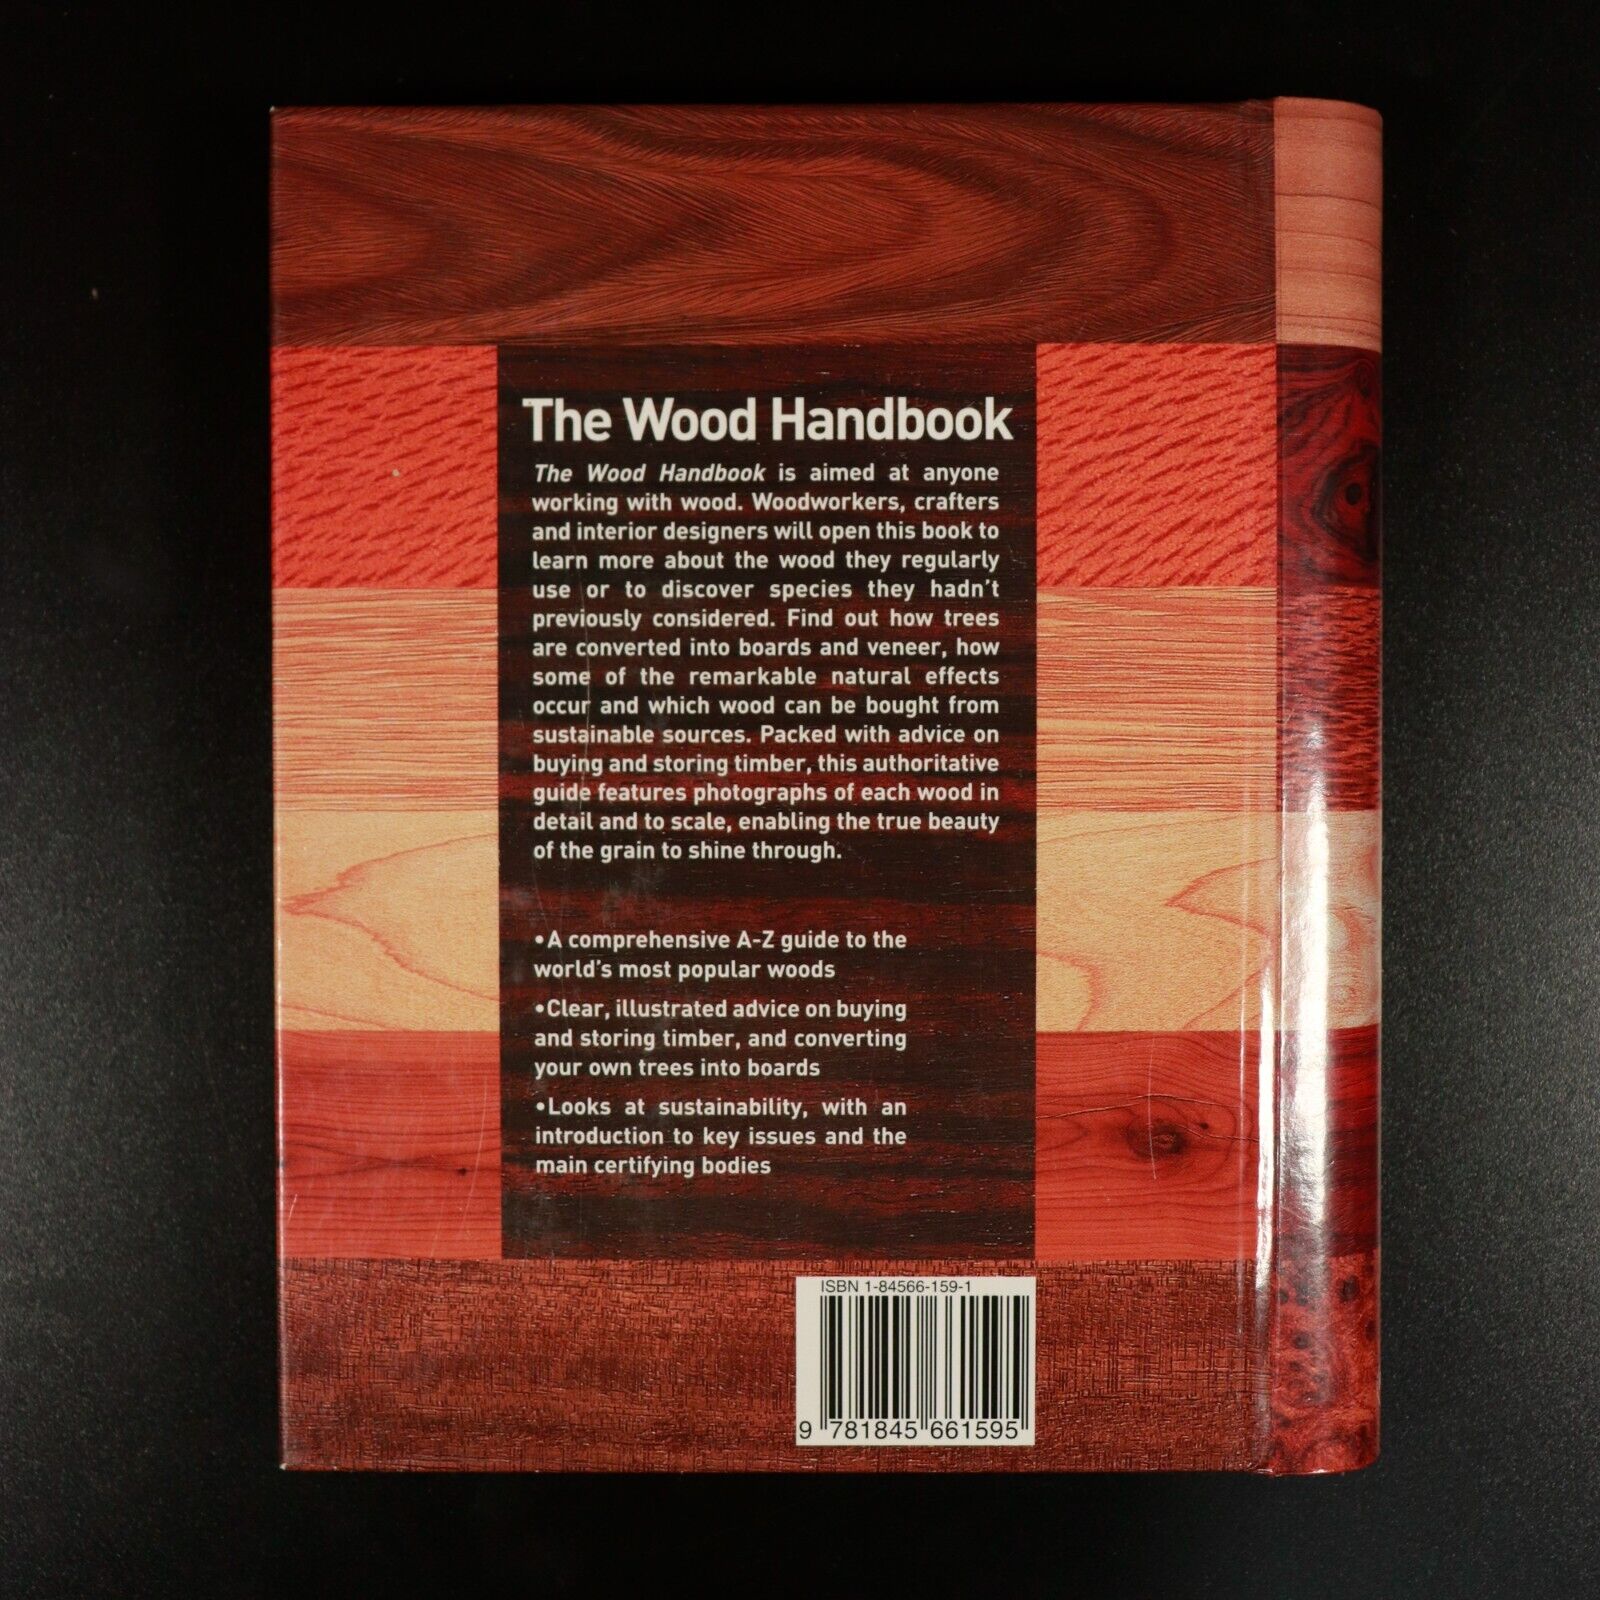 2006 The Wood Handbook by Nick Gibbs Wood Identification Reference Book - 0